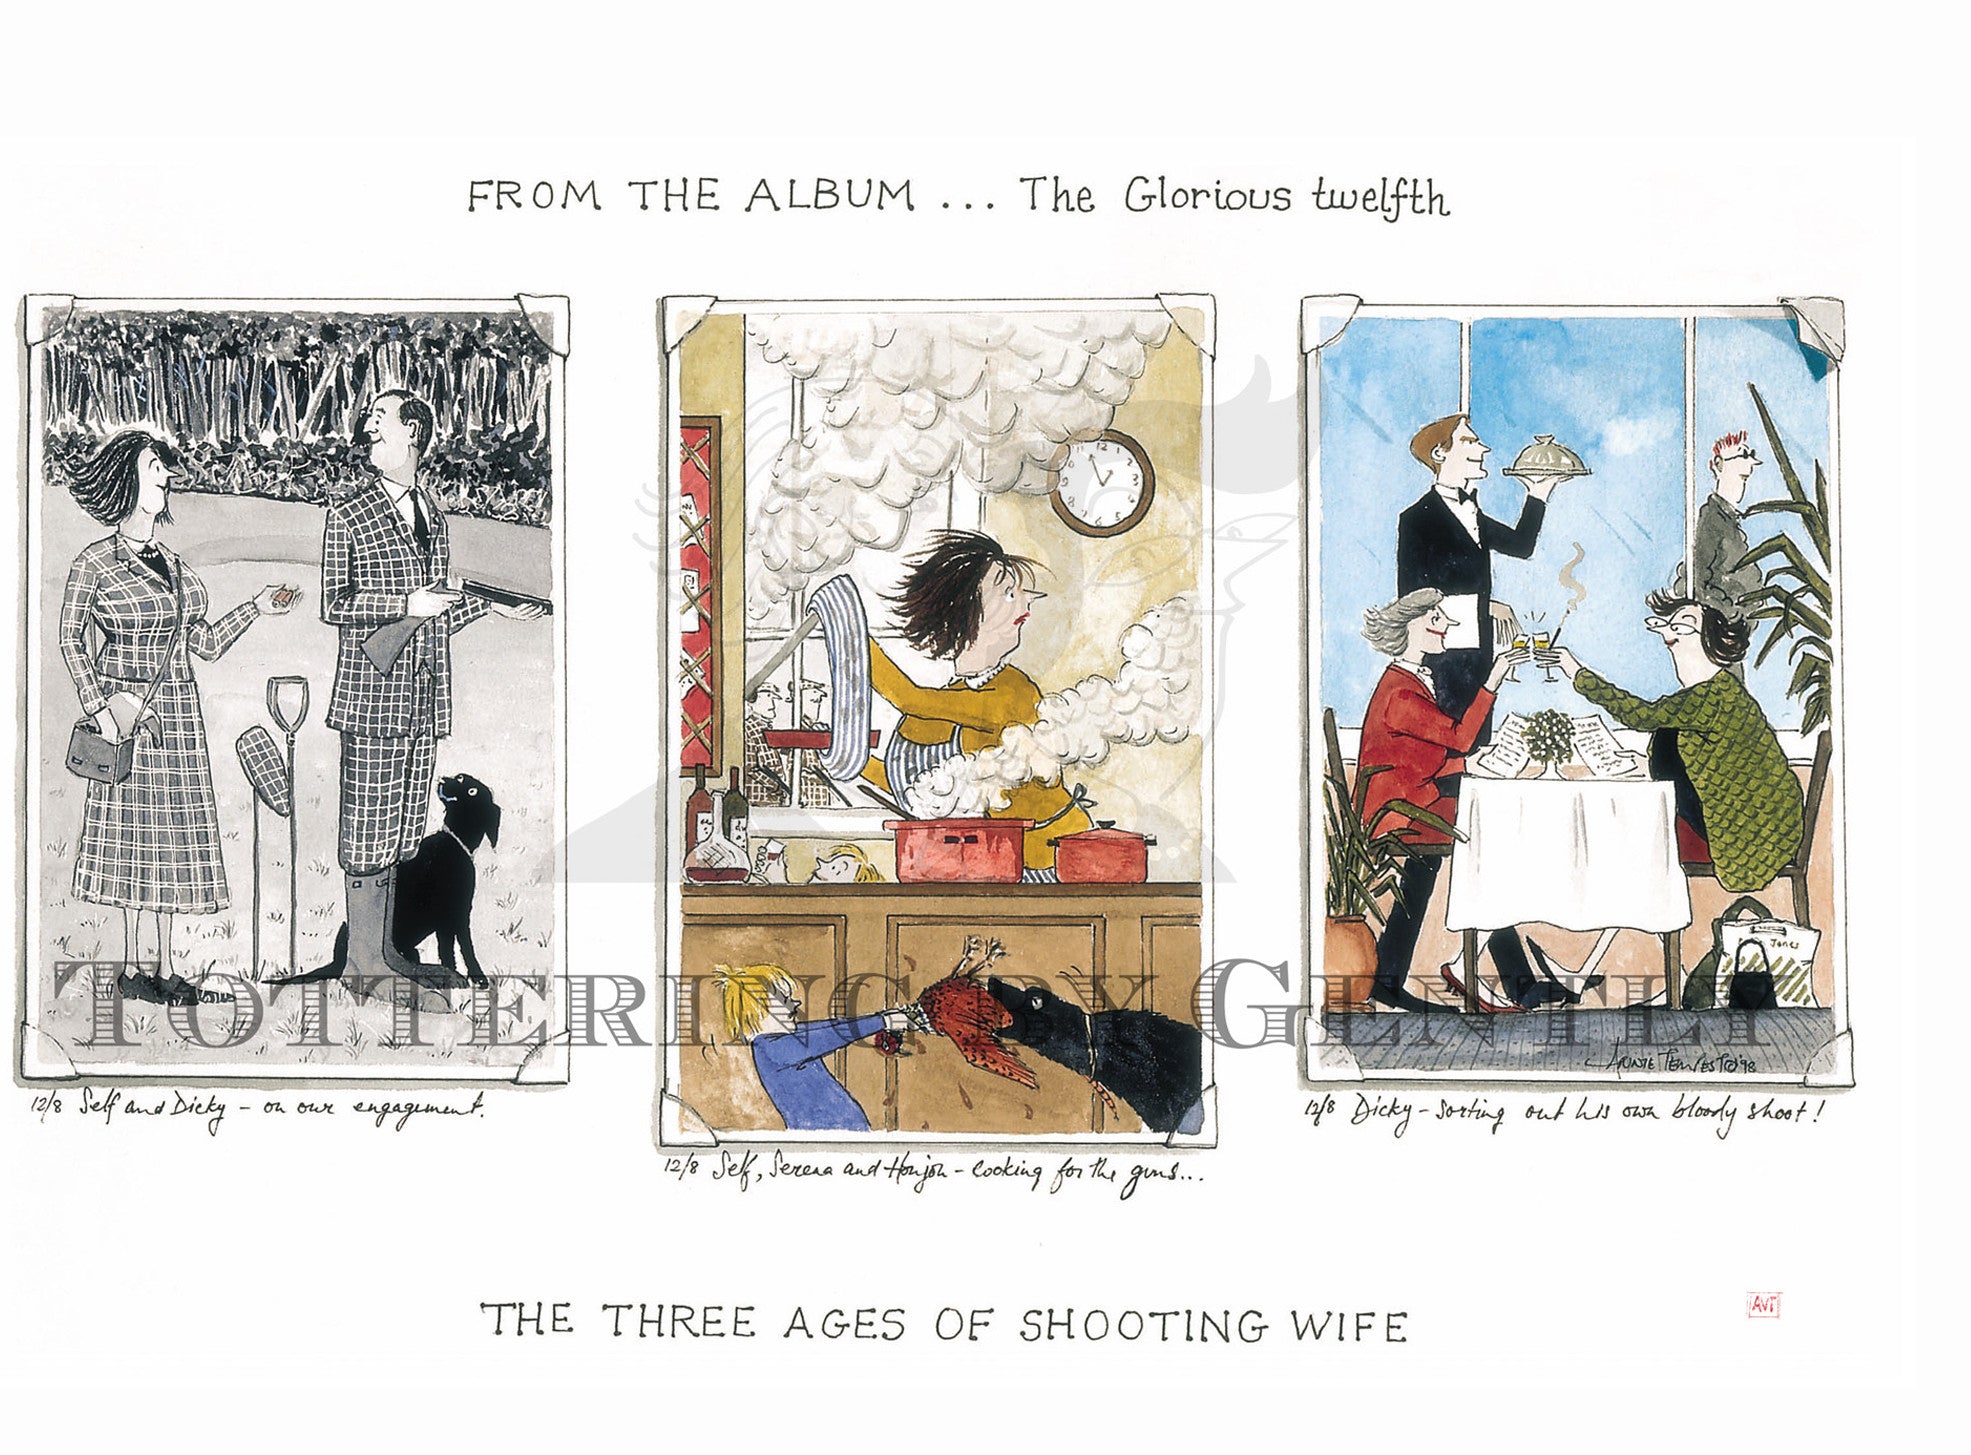 Ages of the shooting wife ...  (S0038)